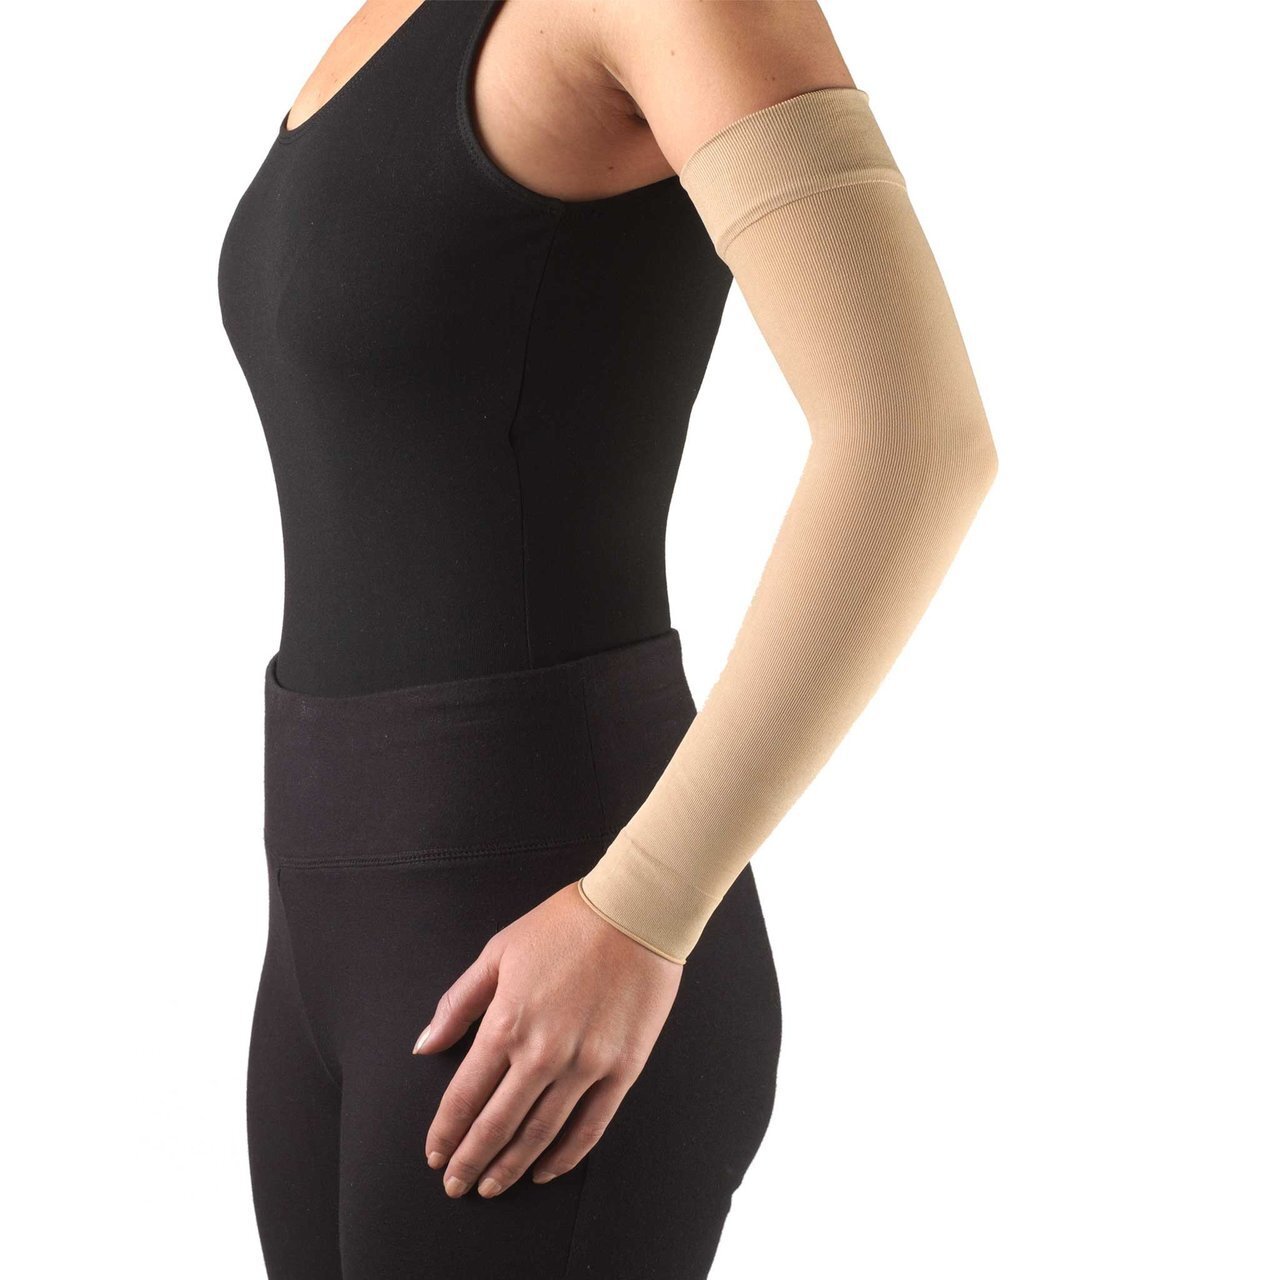 decongestive therapy… - Decongestive Therapy involves MLD (manual Lymphatic Drainage massage), compression bandaging and pressure garment fitting.Learn More…